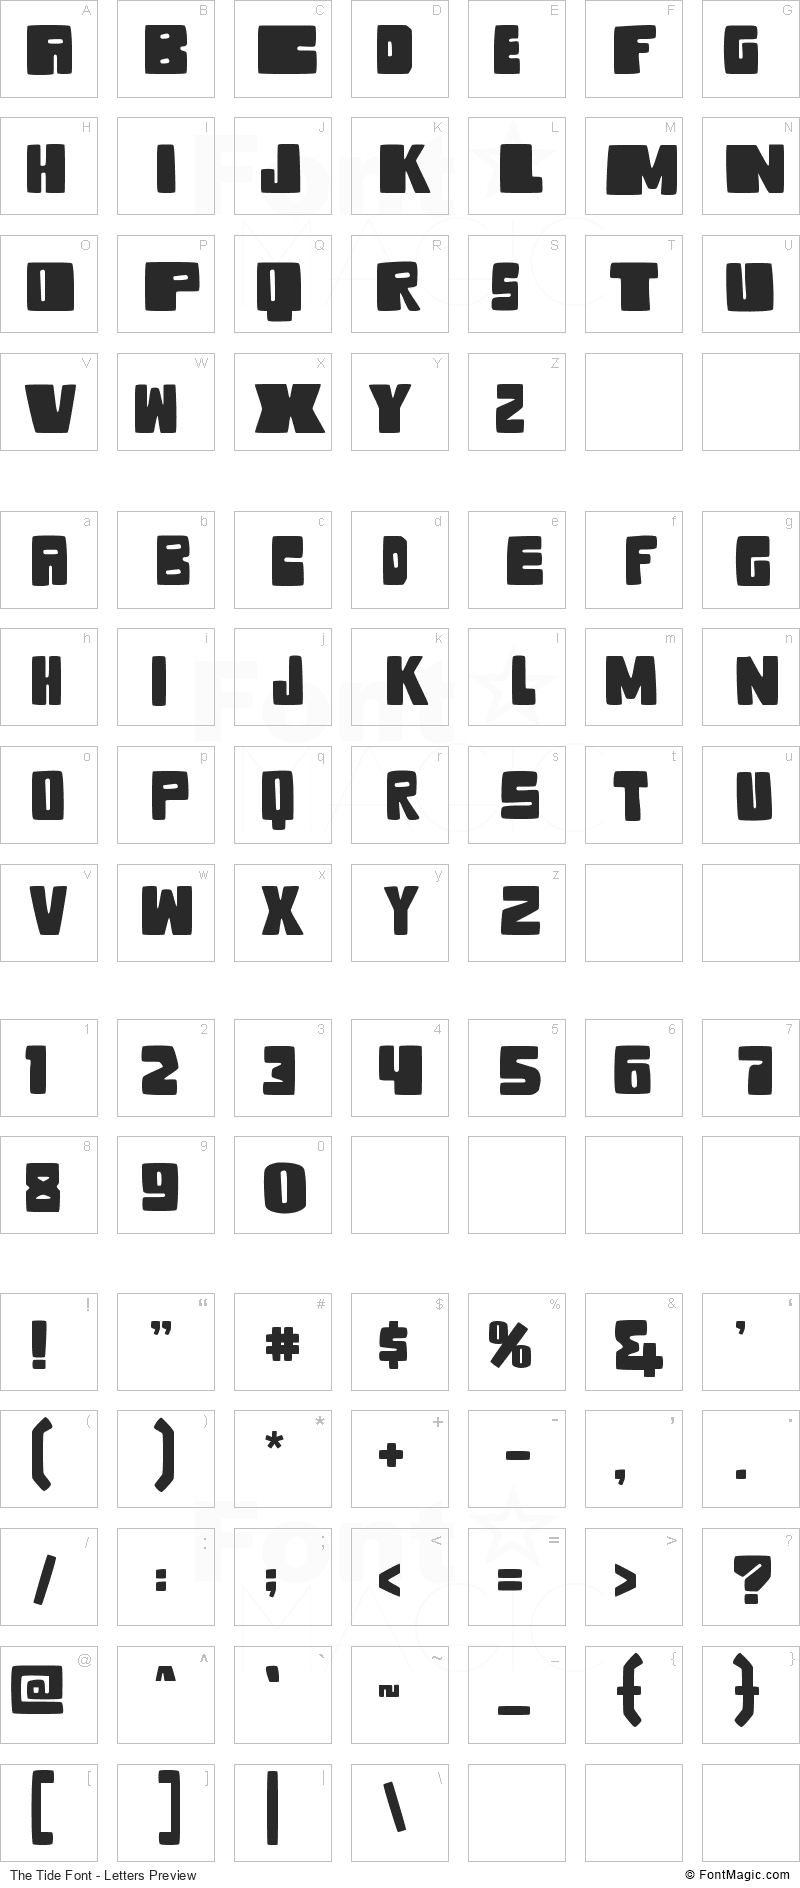 The Tide Font - All Latters Preview Chart